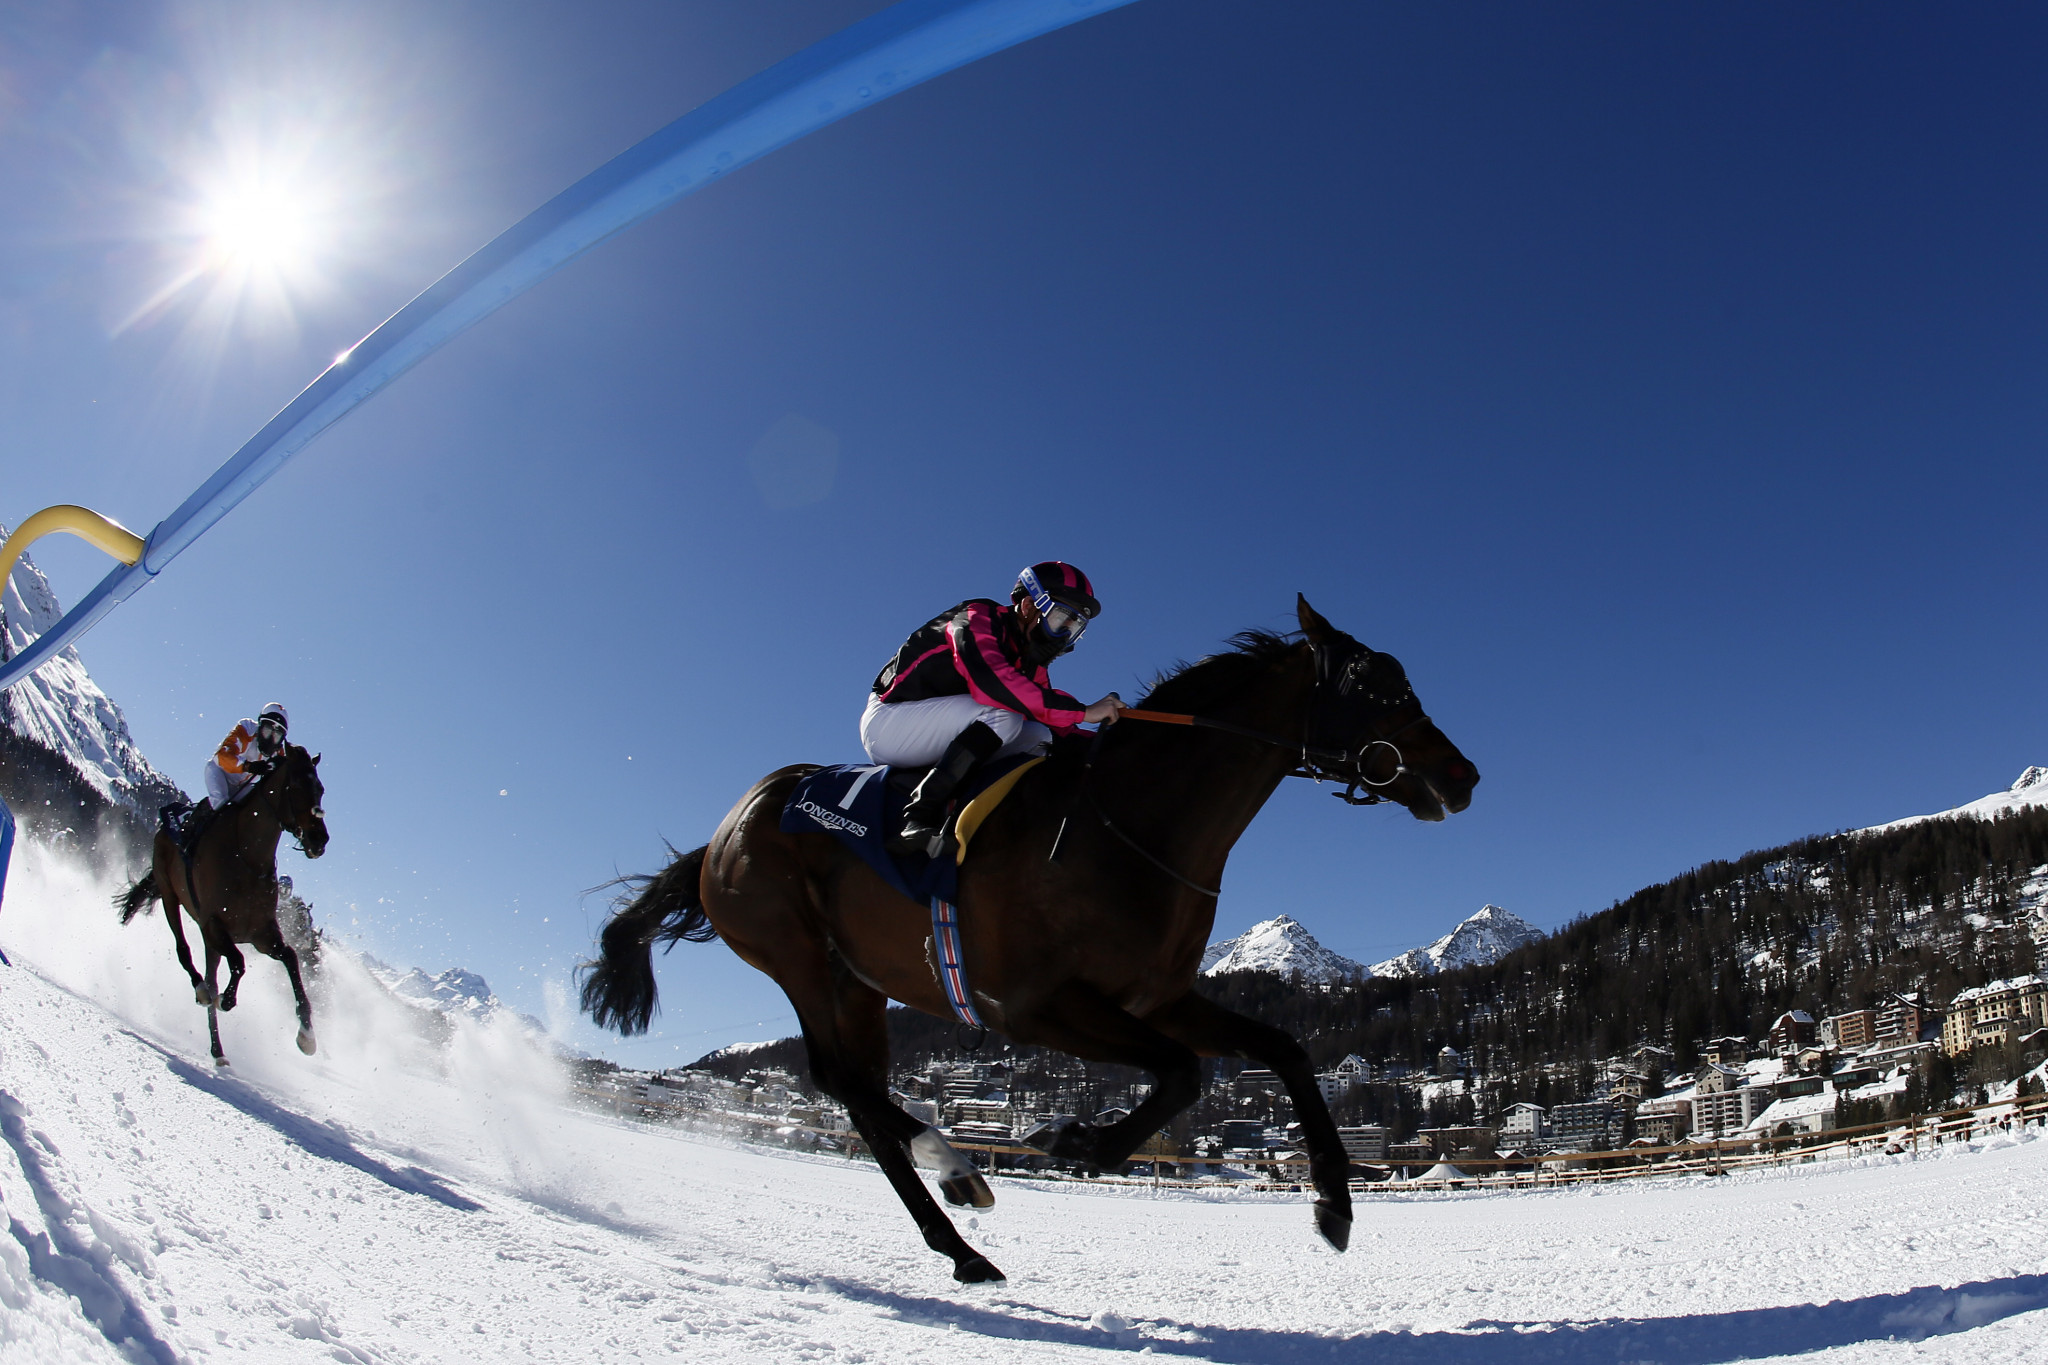 Lake St Moritz hosts a range of events when frozen, including horse racing, and Lausanne 2020 organisers are confident it will be ready for the speed skating starting at the Winter Youth Olympic Games ©Getty Images